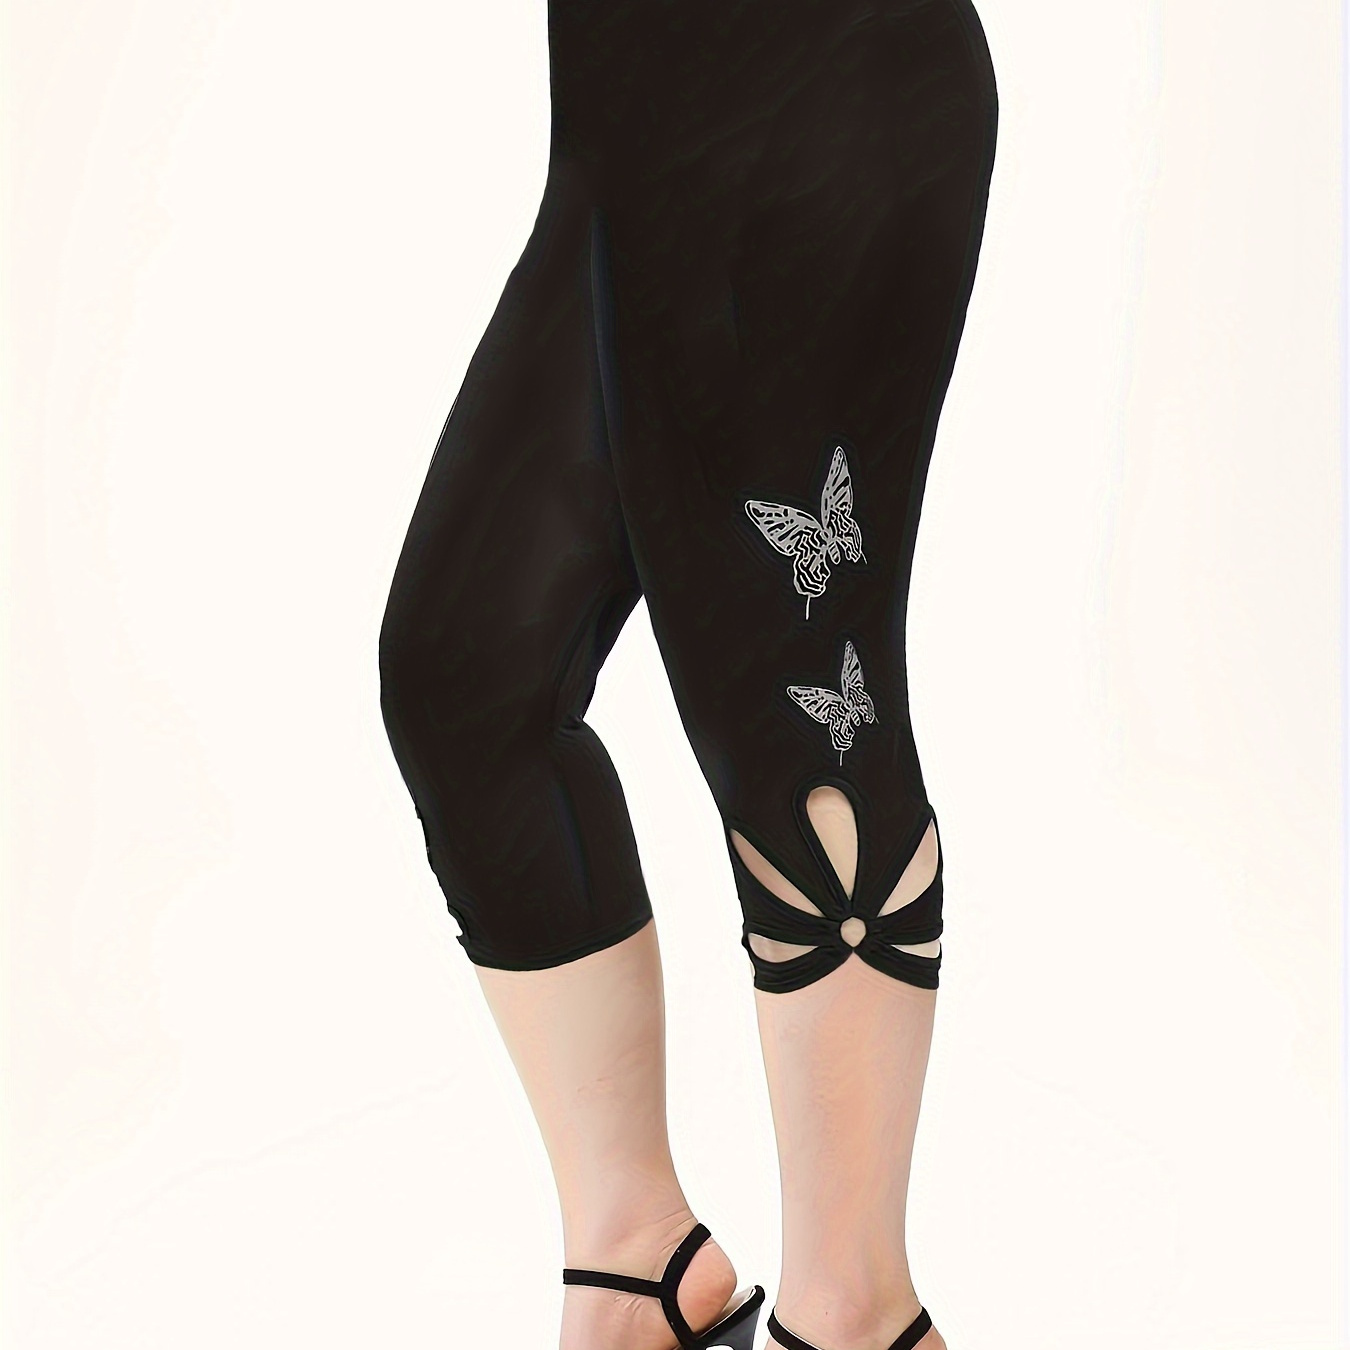 

Leggings with a delicate butterfly pattern, perfect for the warm seasons, a stylish addition to any woman's wardrobe